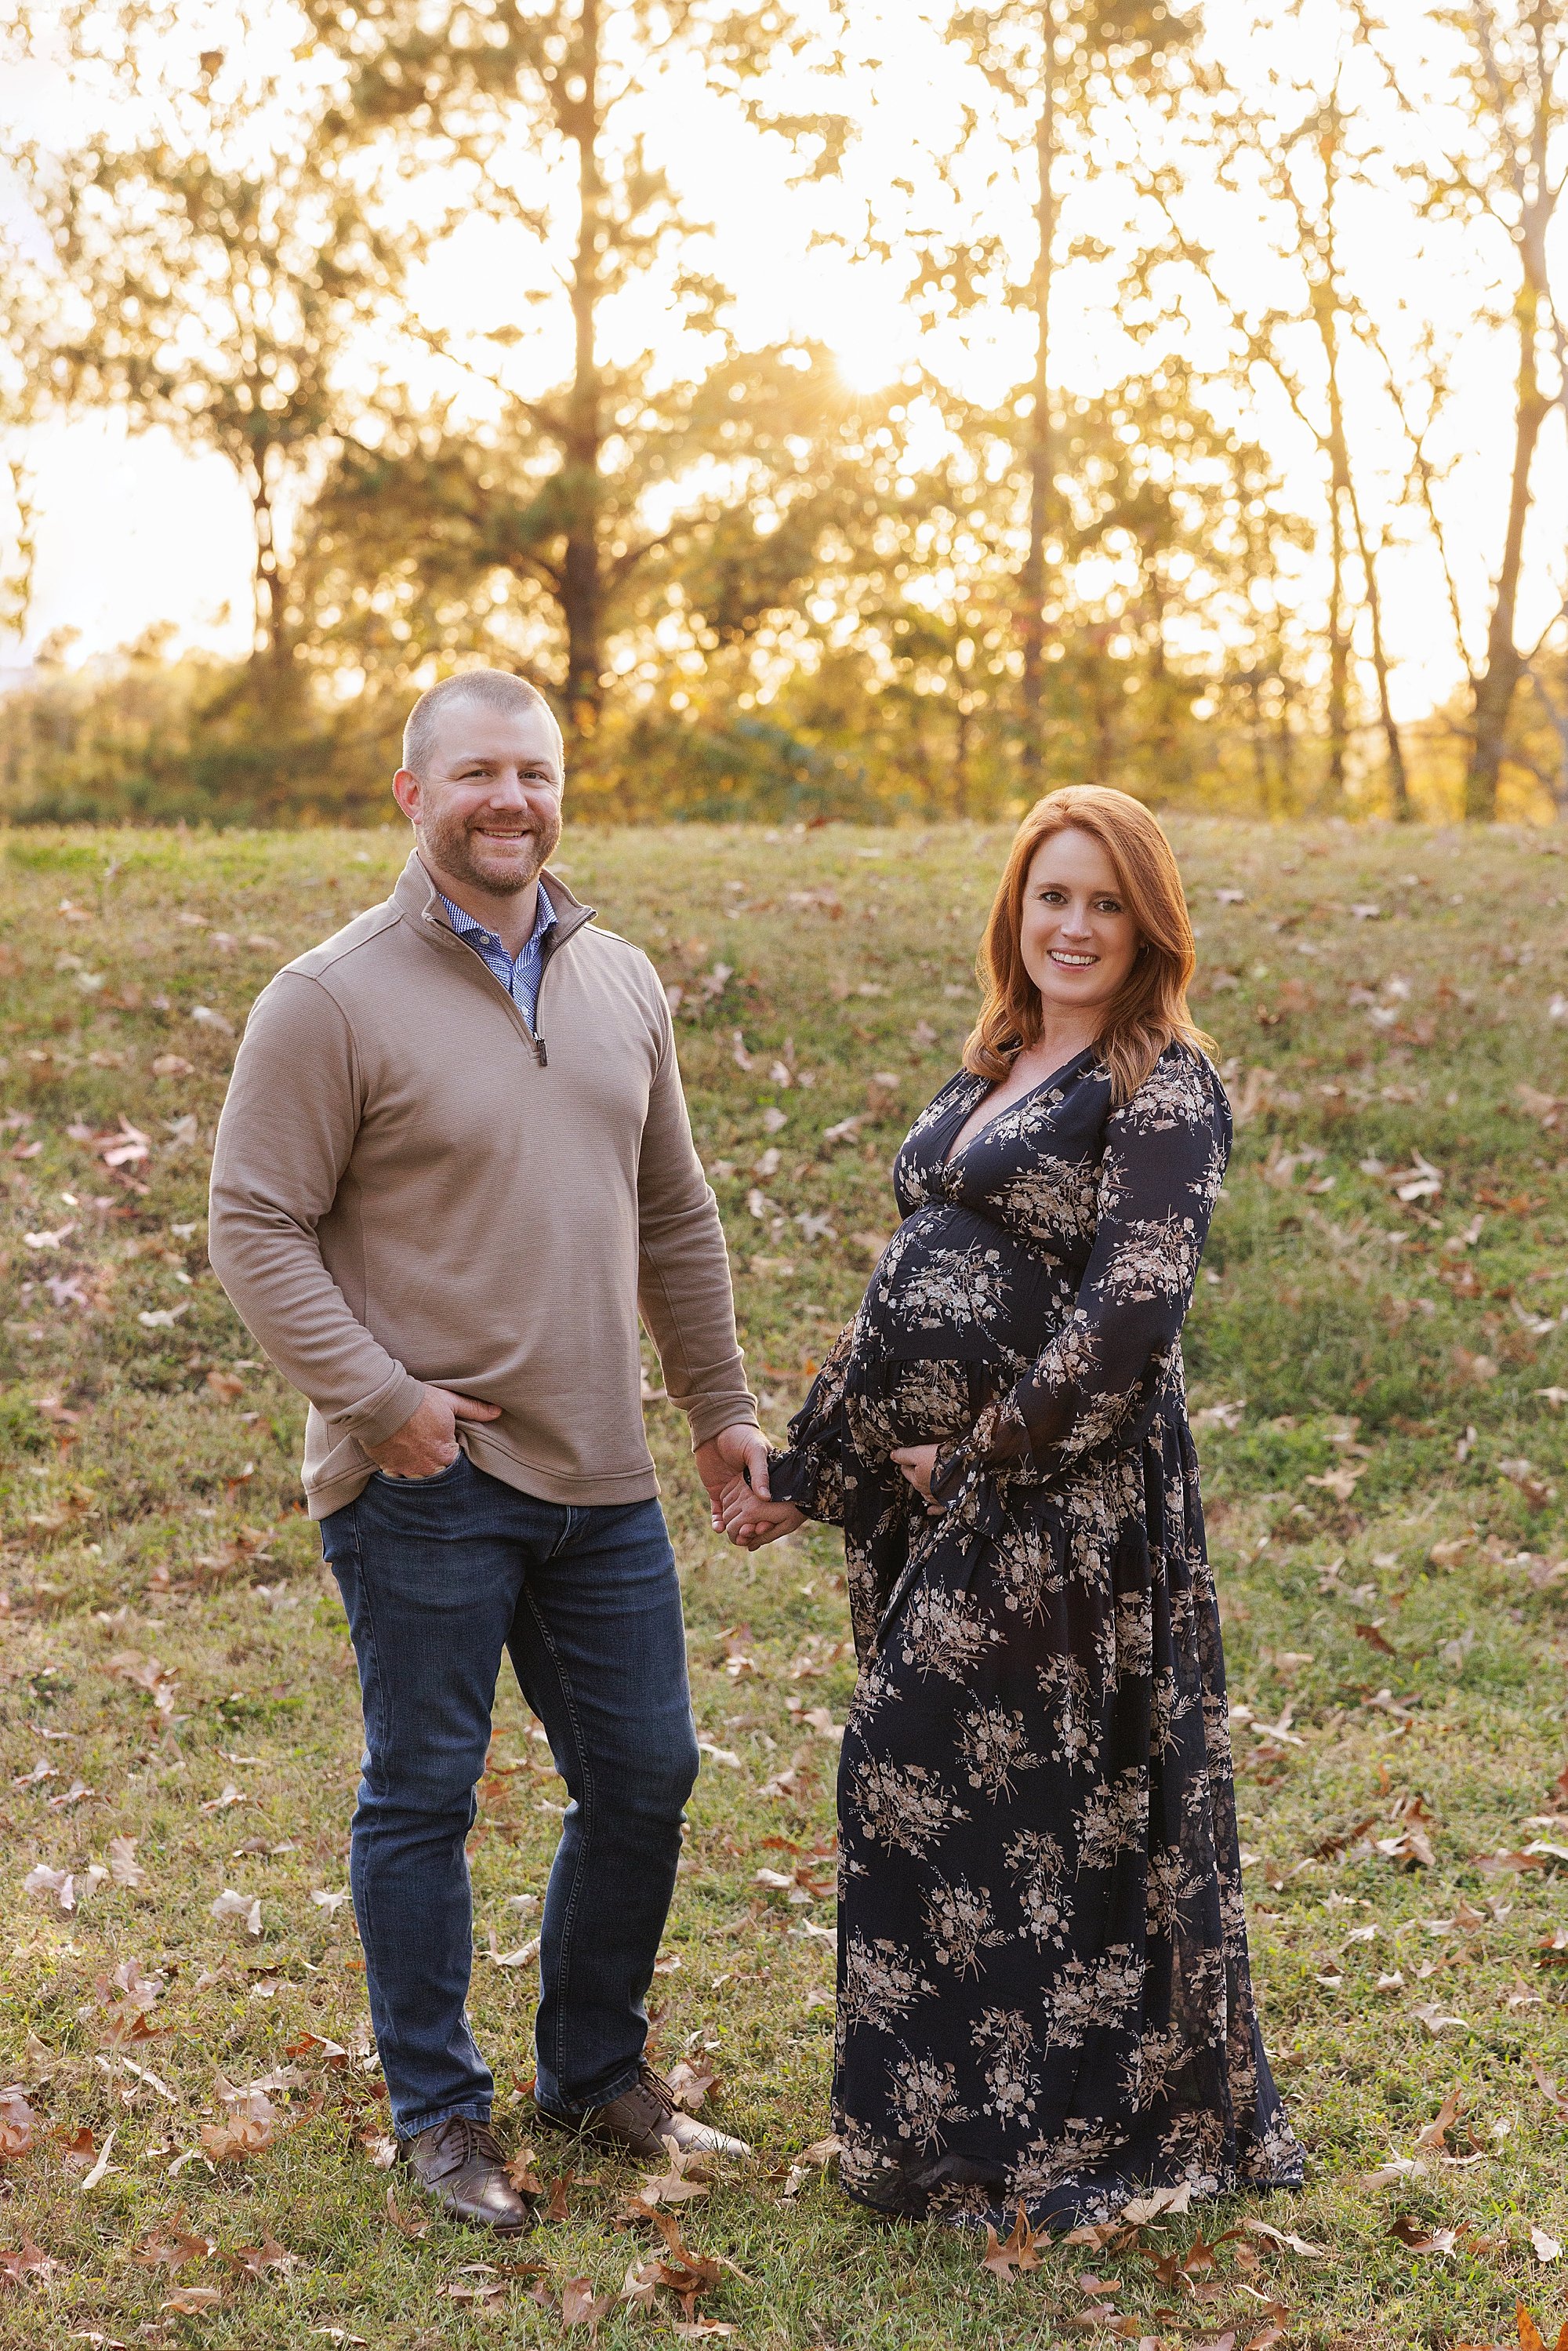 intown-atlanta-decatur-brookhaven-buckhead-outdoor-fall-pictures-family-maternity-photoshoot_5577.jpg